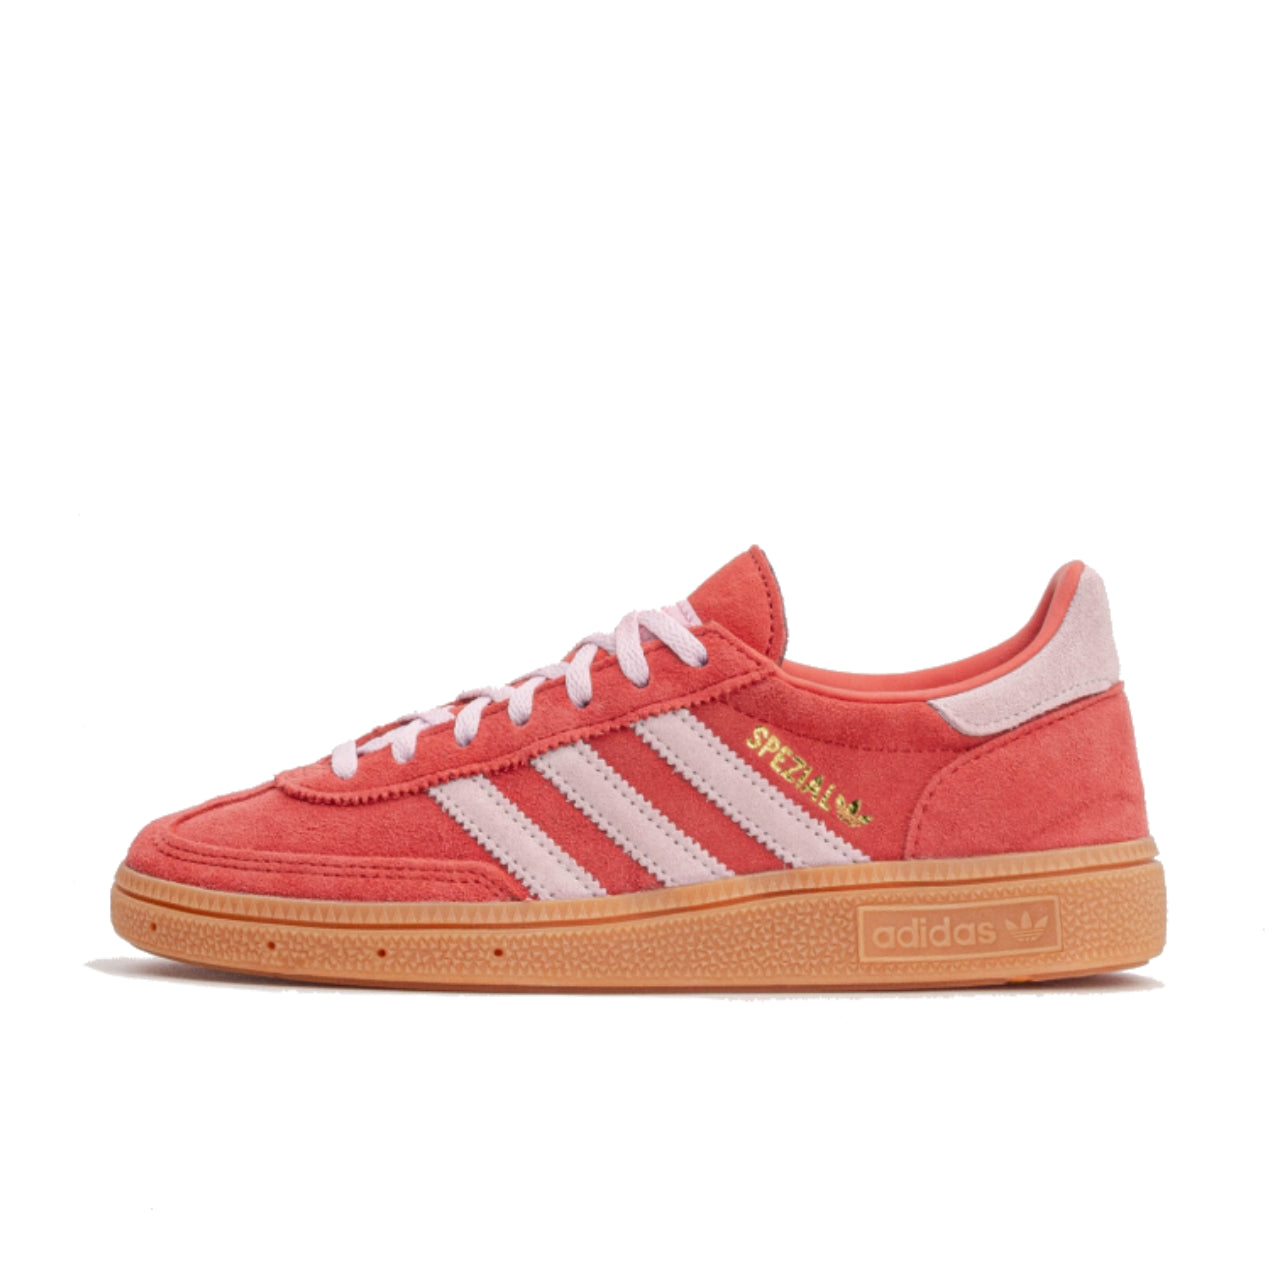 adidas Handball Spezial Bright Red Clear Pink - IE5894 - Left